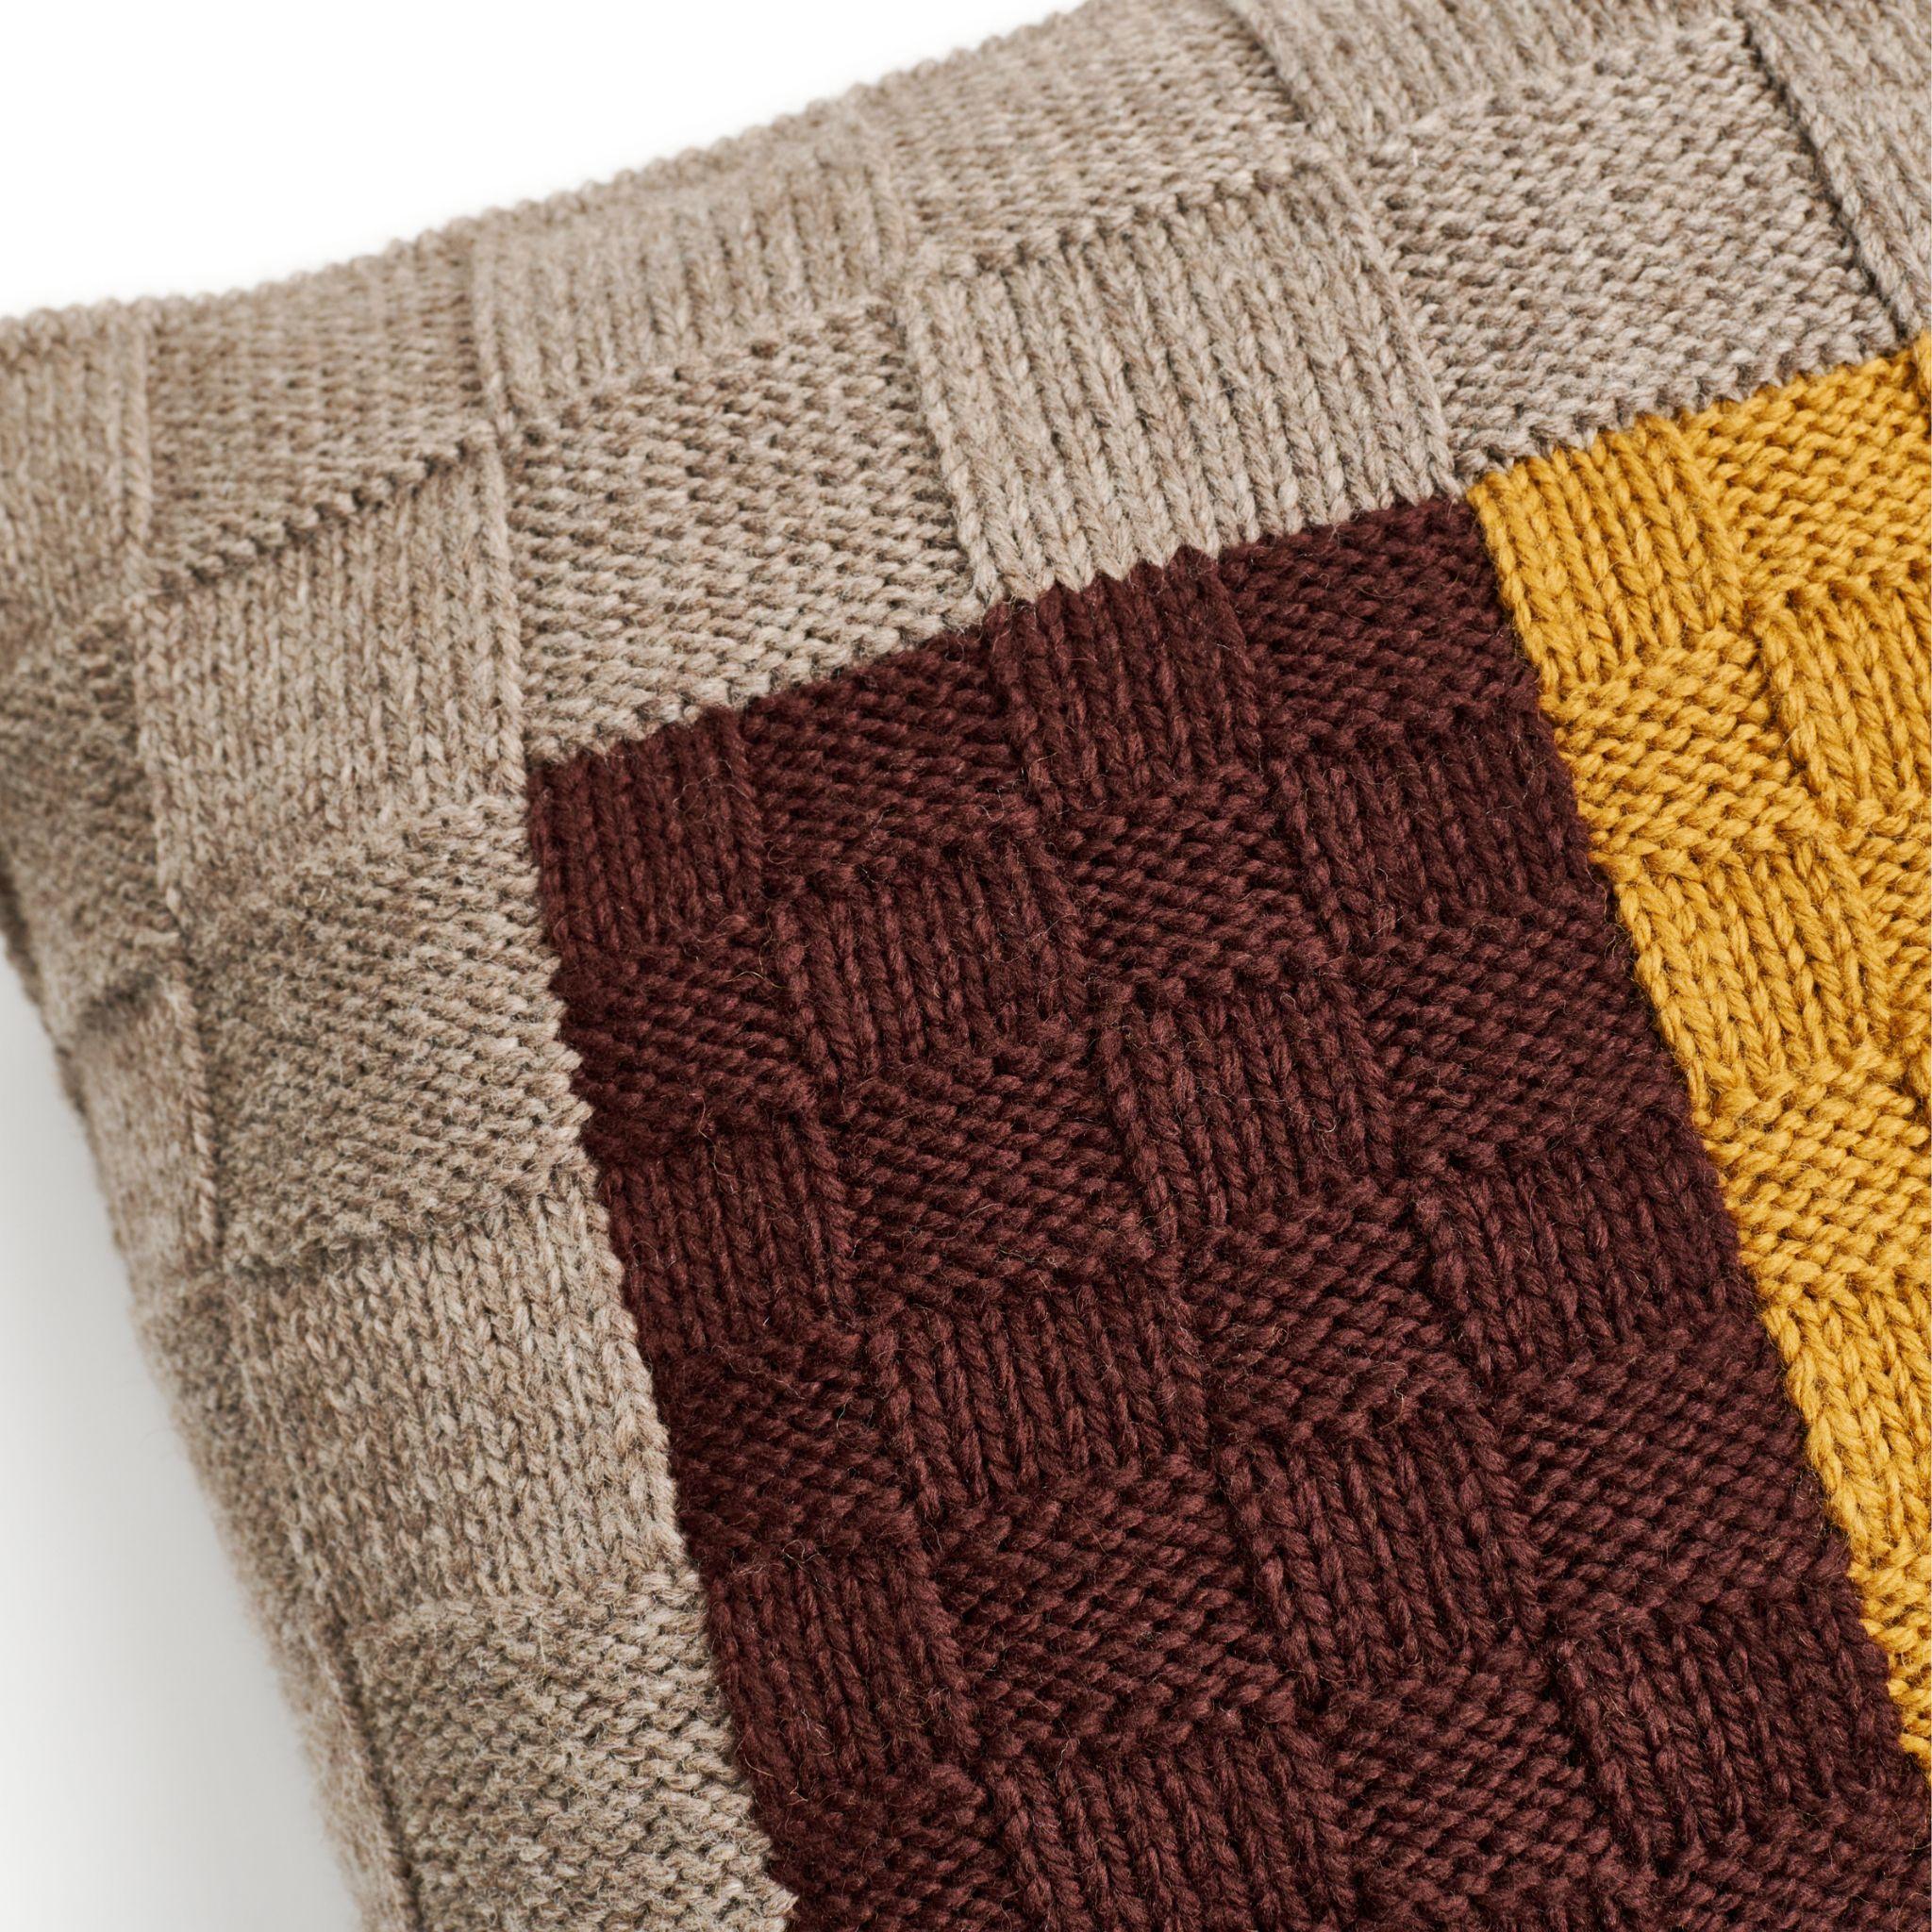 Modern Andes Topaz Pillow Hand Knitted By Peruvian Artisans in Andean Highland Wool For Sale